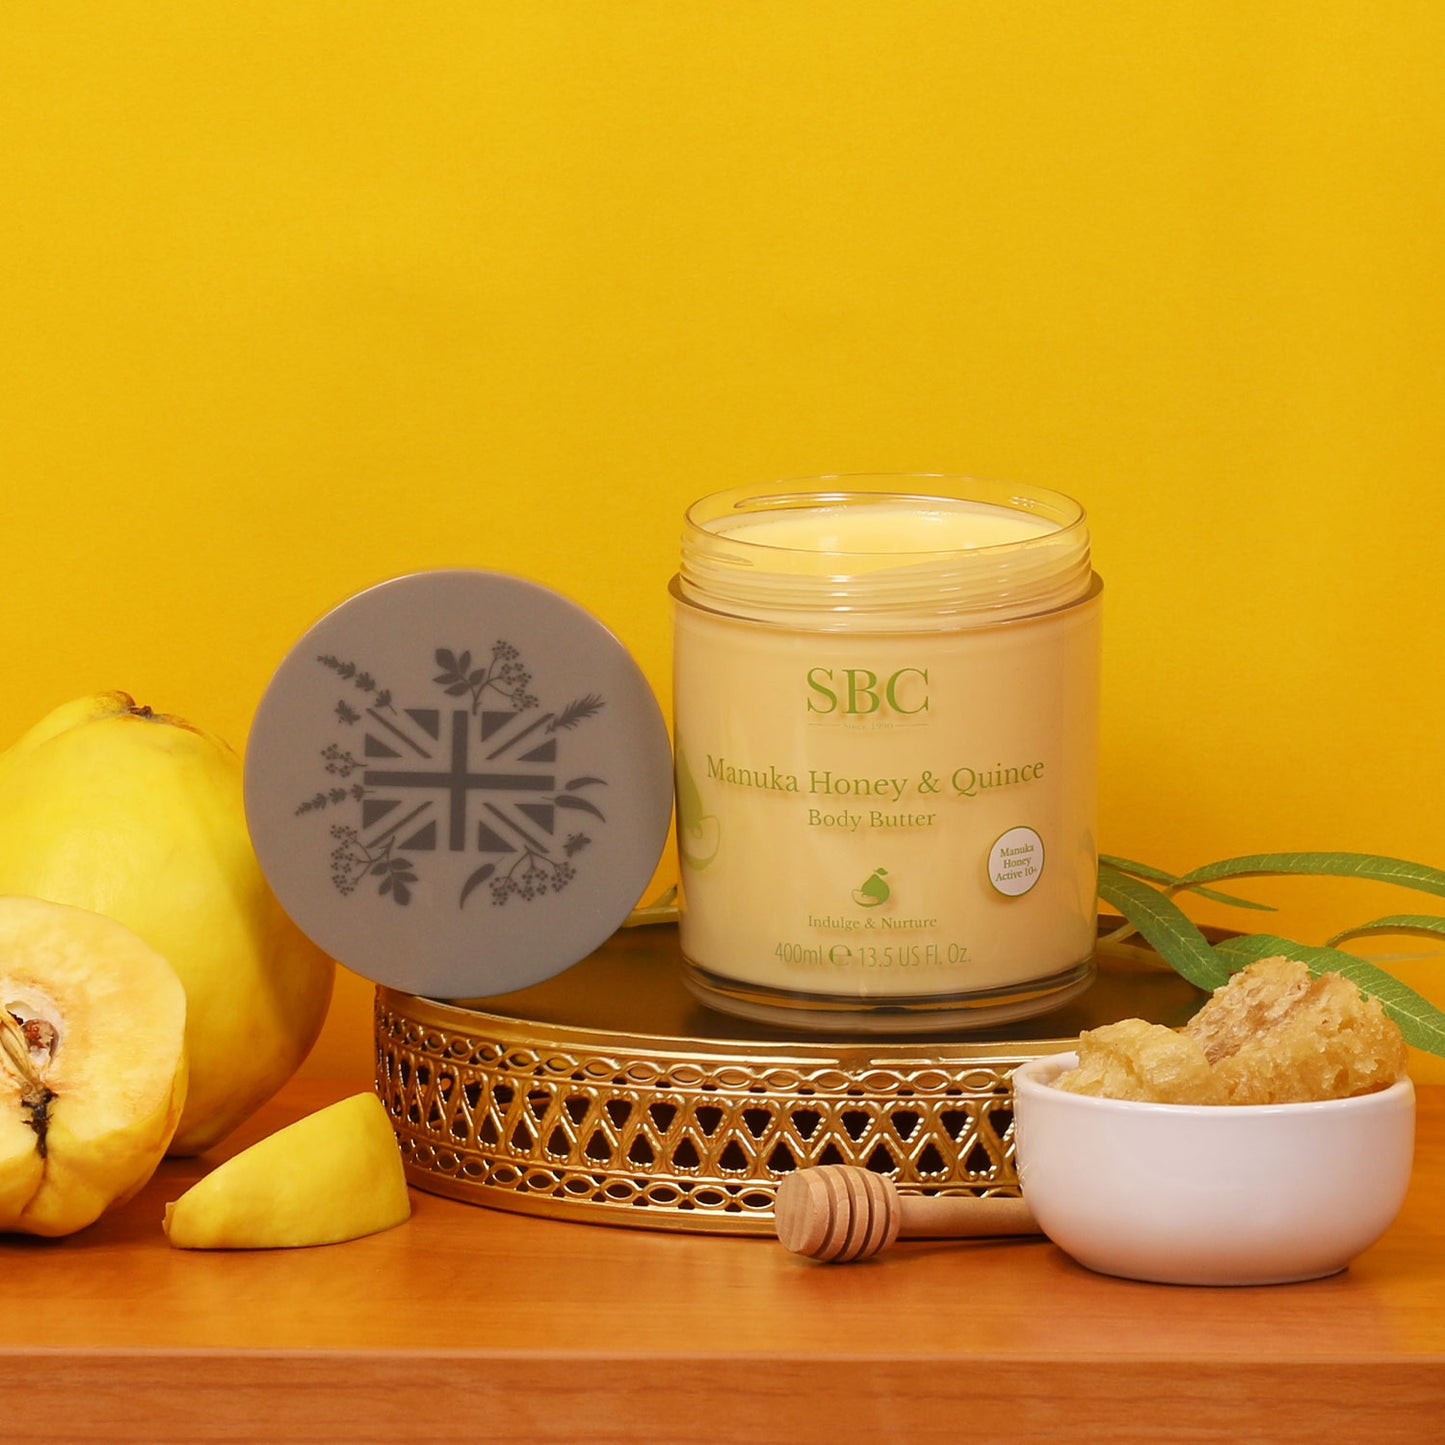 Manuka Honey & Quince Body Butter on a gold plinth with a bright yellow background 